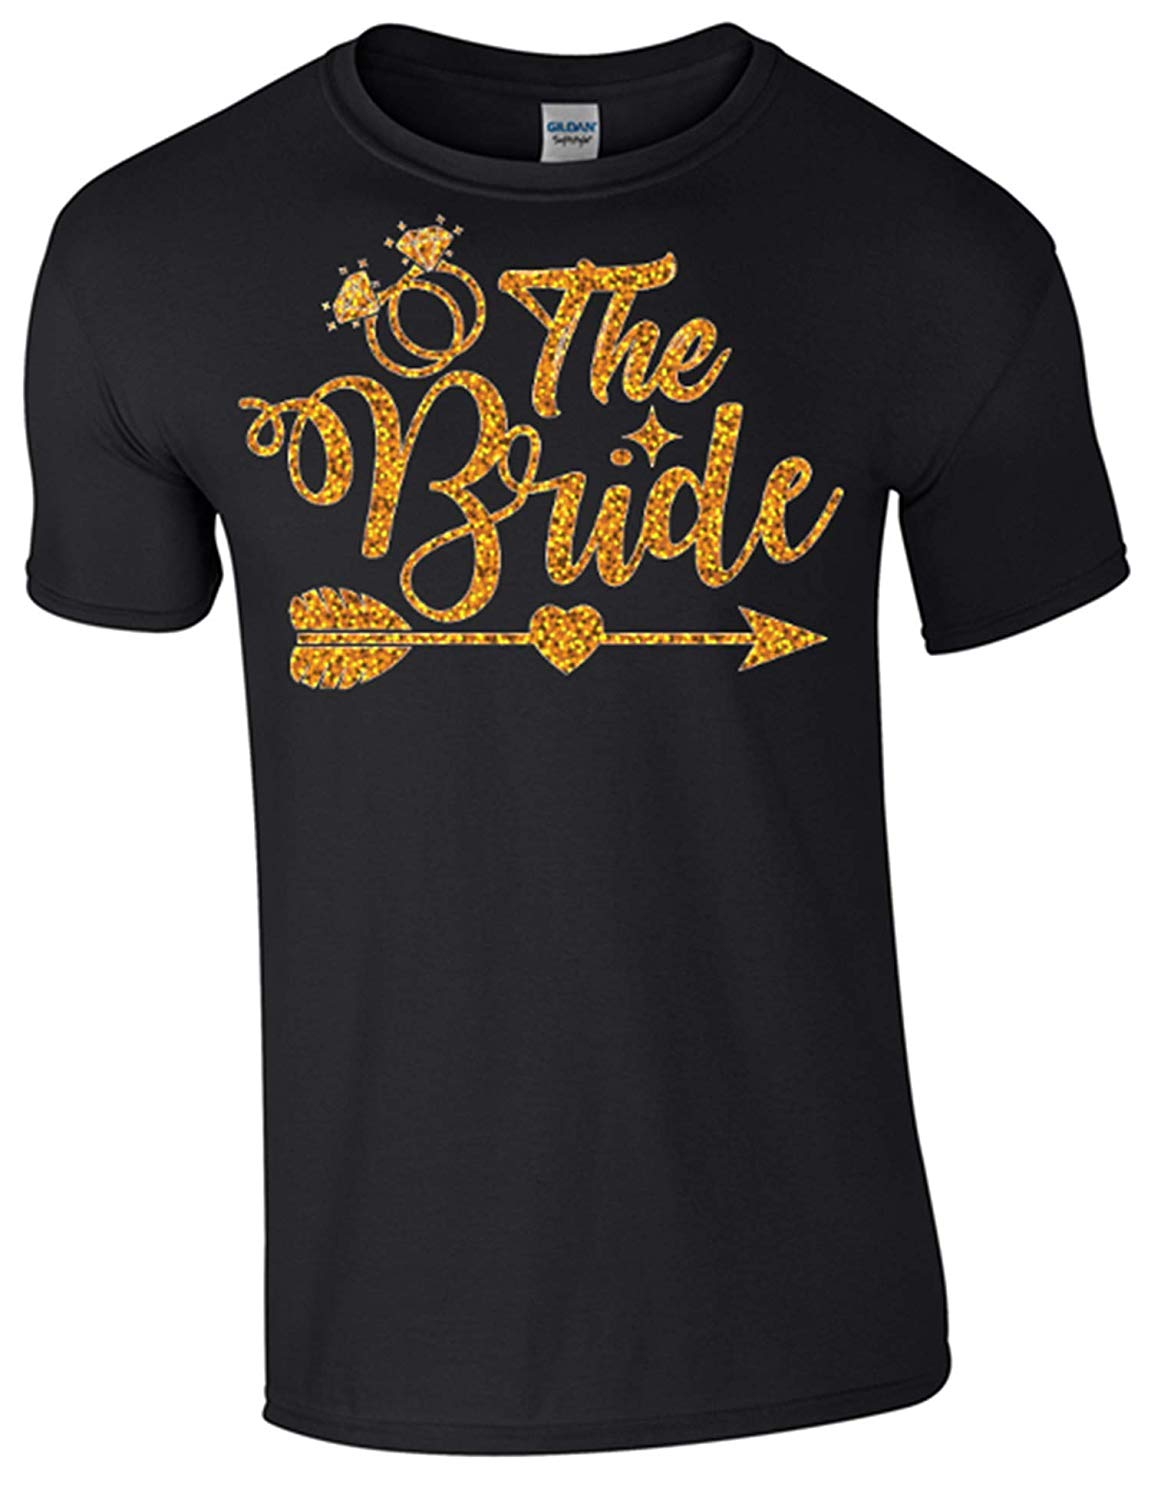 Army 1157 Kit Hen Party Bride and Bride Crewe T-Shirts - Army 1157 kit Bride Black / L Army 1157 Kit Veterans Owned Business